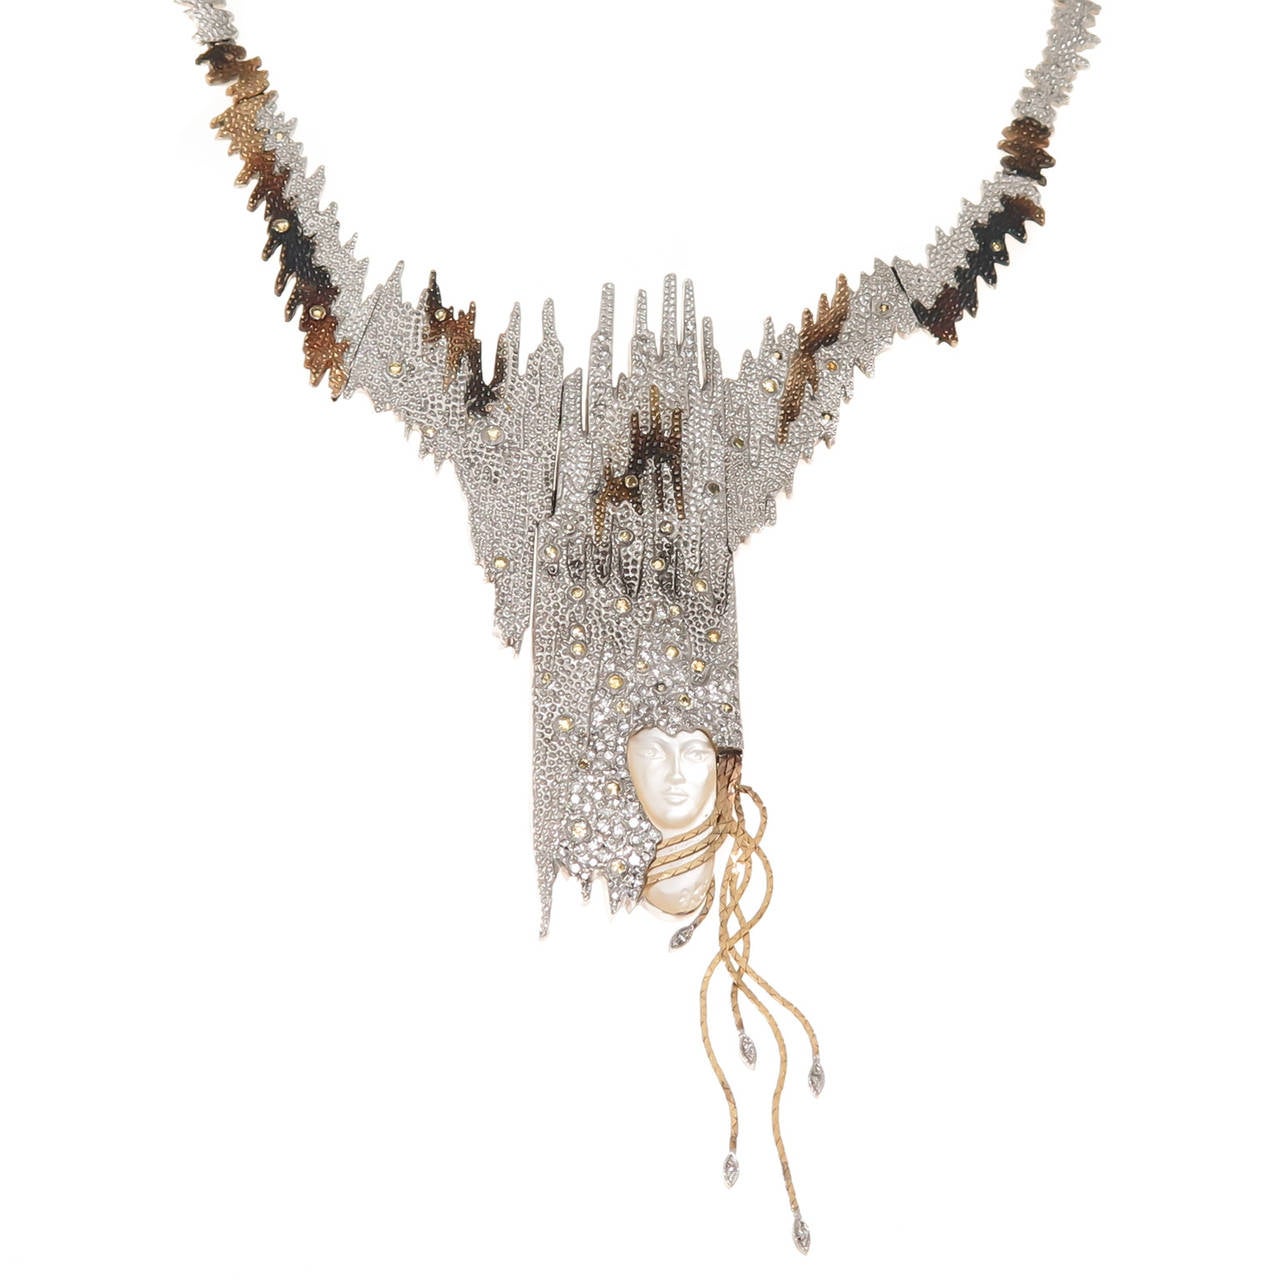 Circa 1984 Sophistication Necklace by Erte, 14K Yellow Gold and Sterling Silver, Finely textured and having Granulation work throughout, set with Numerous Diamonds and a Carved Face of Mother Of Pearl. This Piece converts into a large Brooch and a